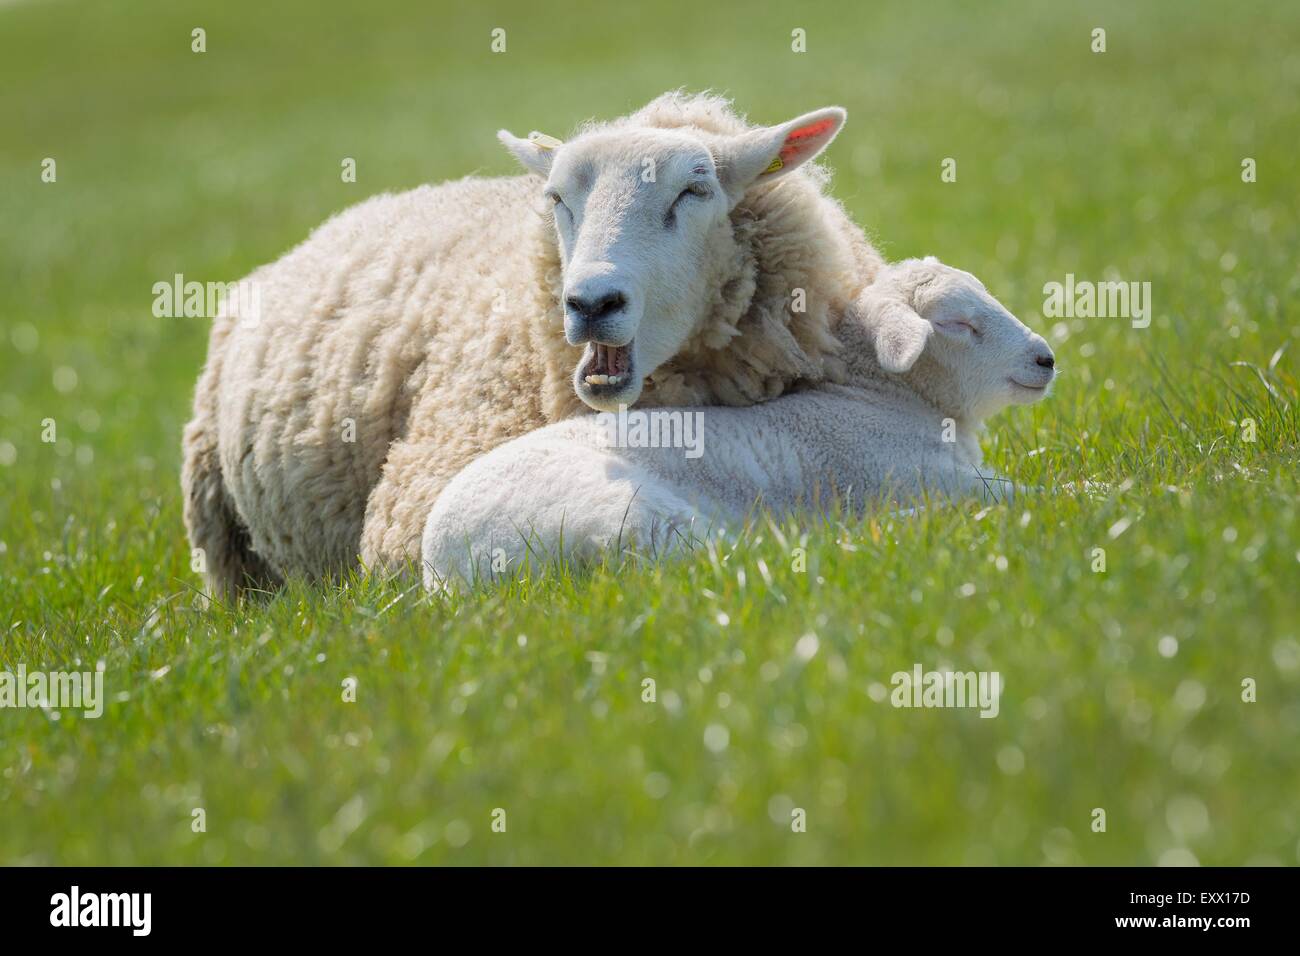 Ewe and lamb on meadow, Keitum, Sylt, Schleswig-Holstein, Germany, Europe Stock Photo